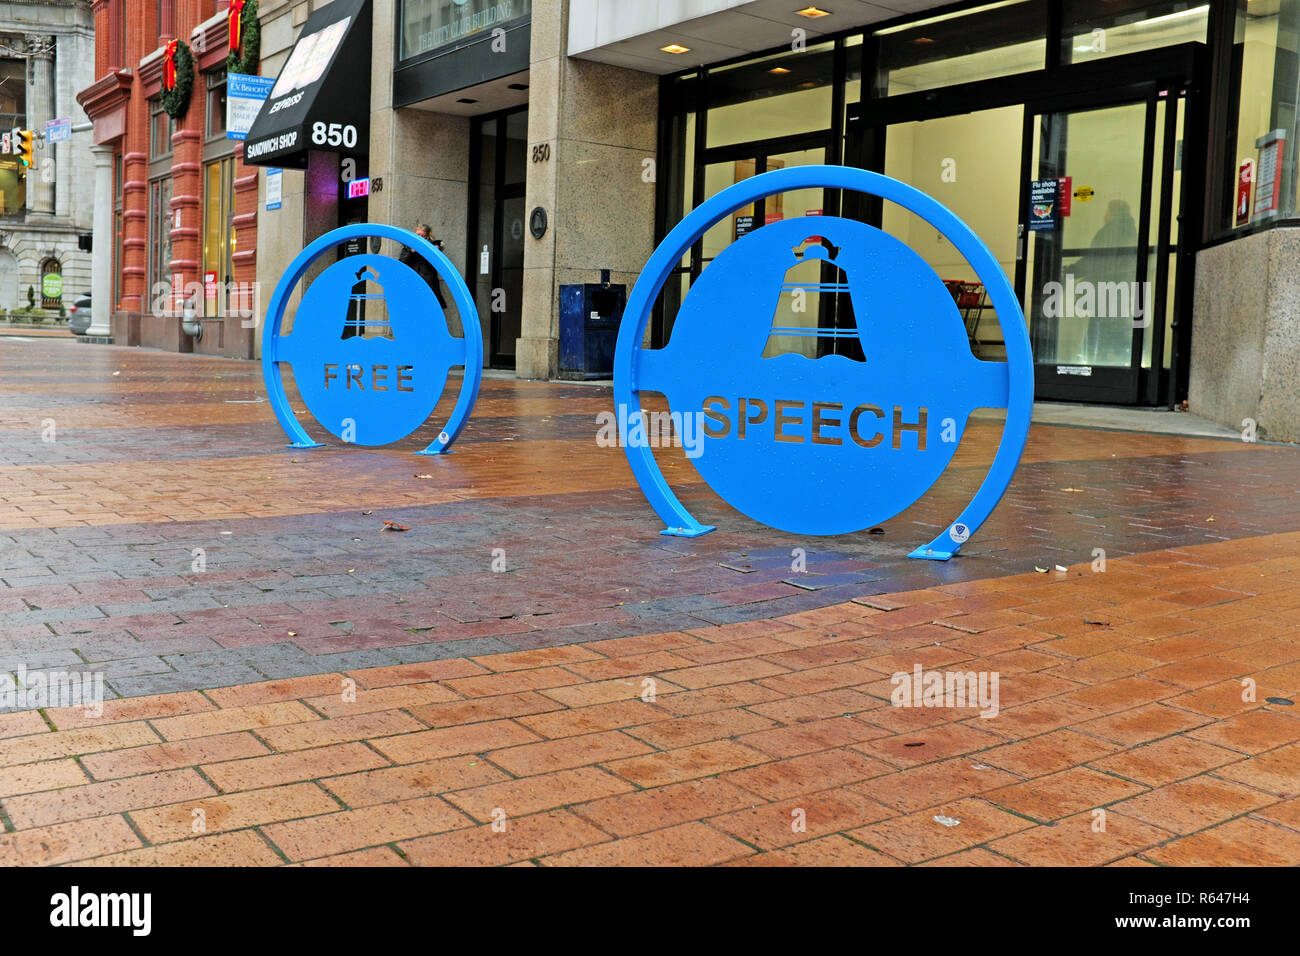 Two blue metal signs in the middle of the sidewalk in downtown Cleveland, Ohio outside The Cleveland City Club state 'Free' 'Speech'. Stock Photo